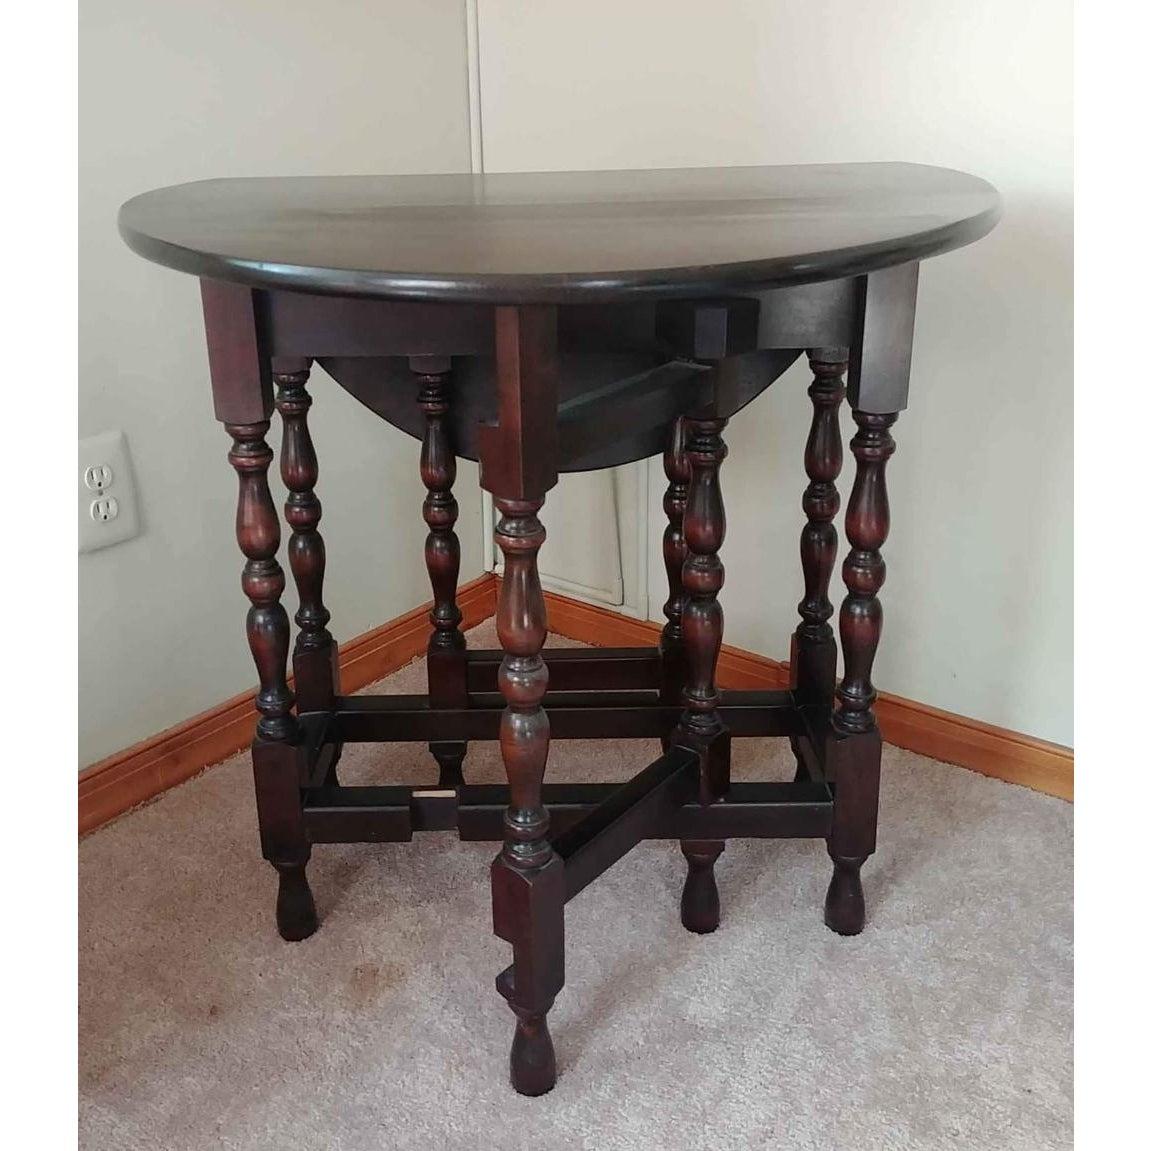 An antique Solid Mahogany wood gateleg accent table. Features the oval planked drop-leaf top. Table top sits on turned legs joined by stretchers. The original 17th century English.
Table measures with leaves dropped: 13 W x 30 D x 30 H
And with